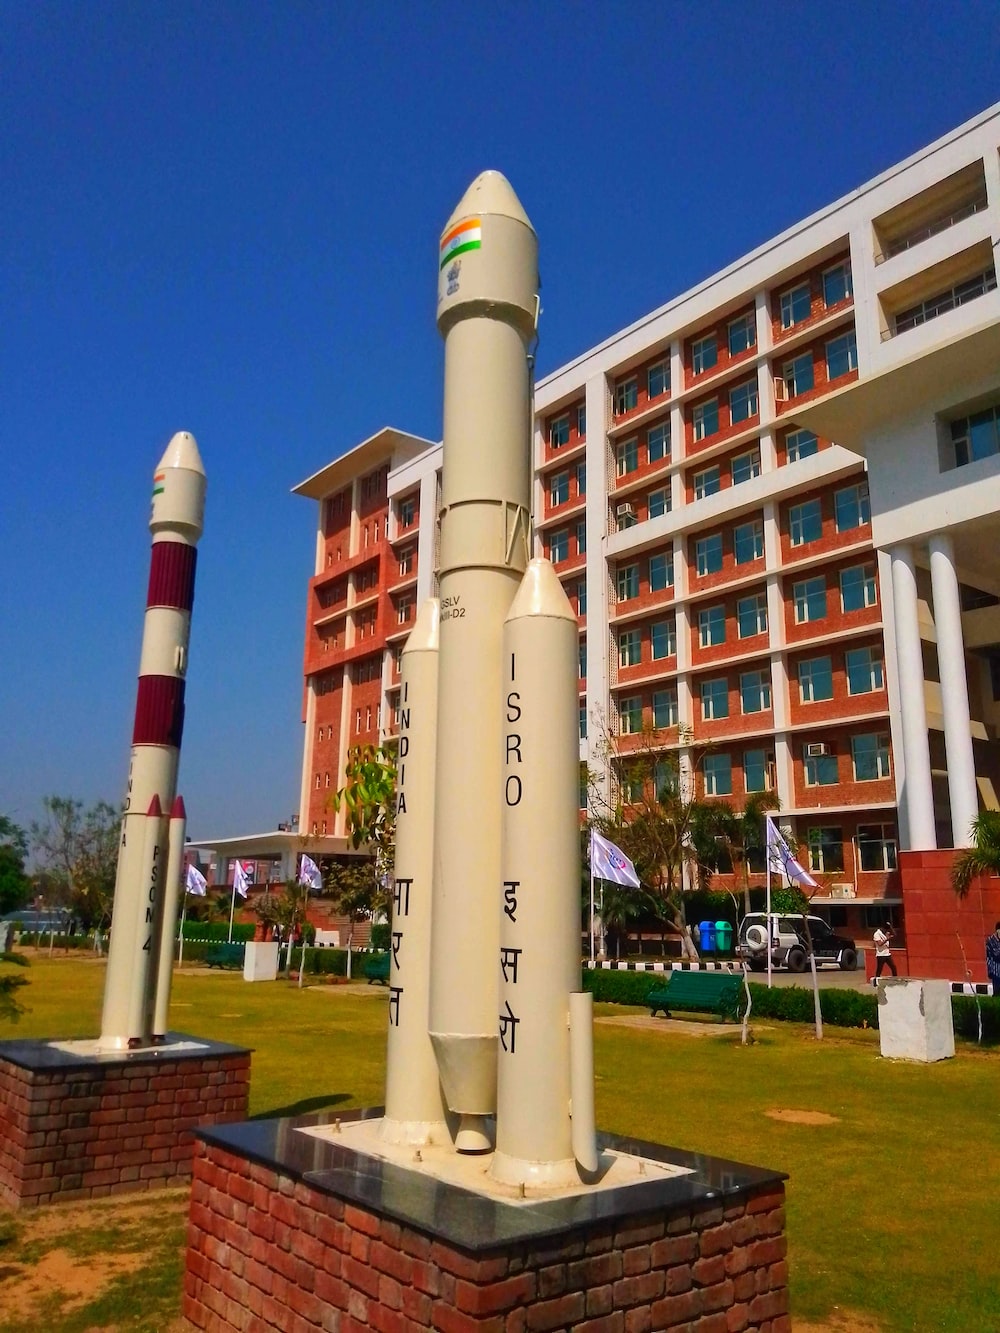 a large rocket sitting on top of a brick block